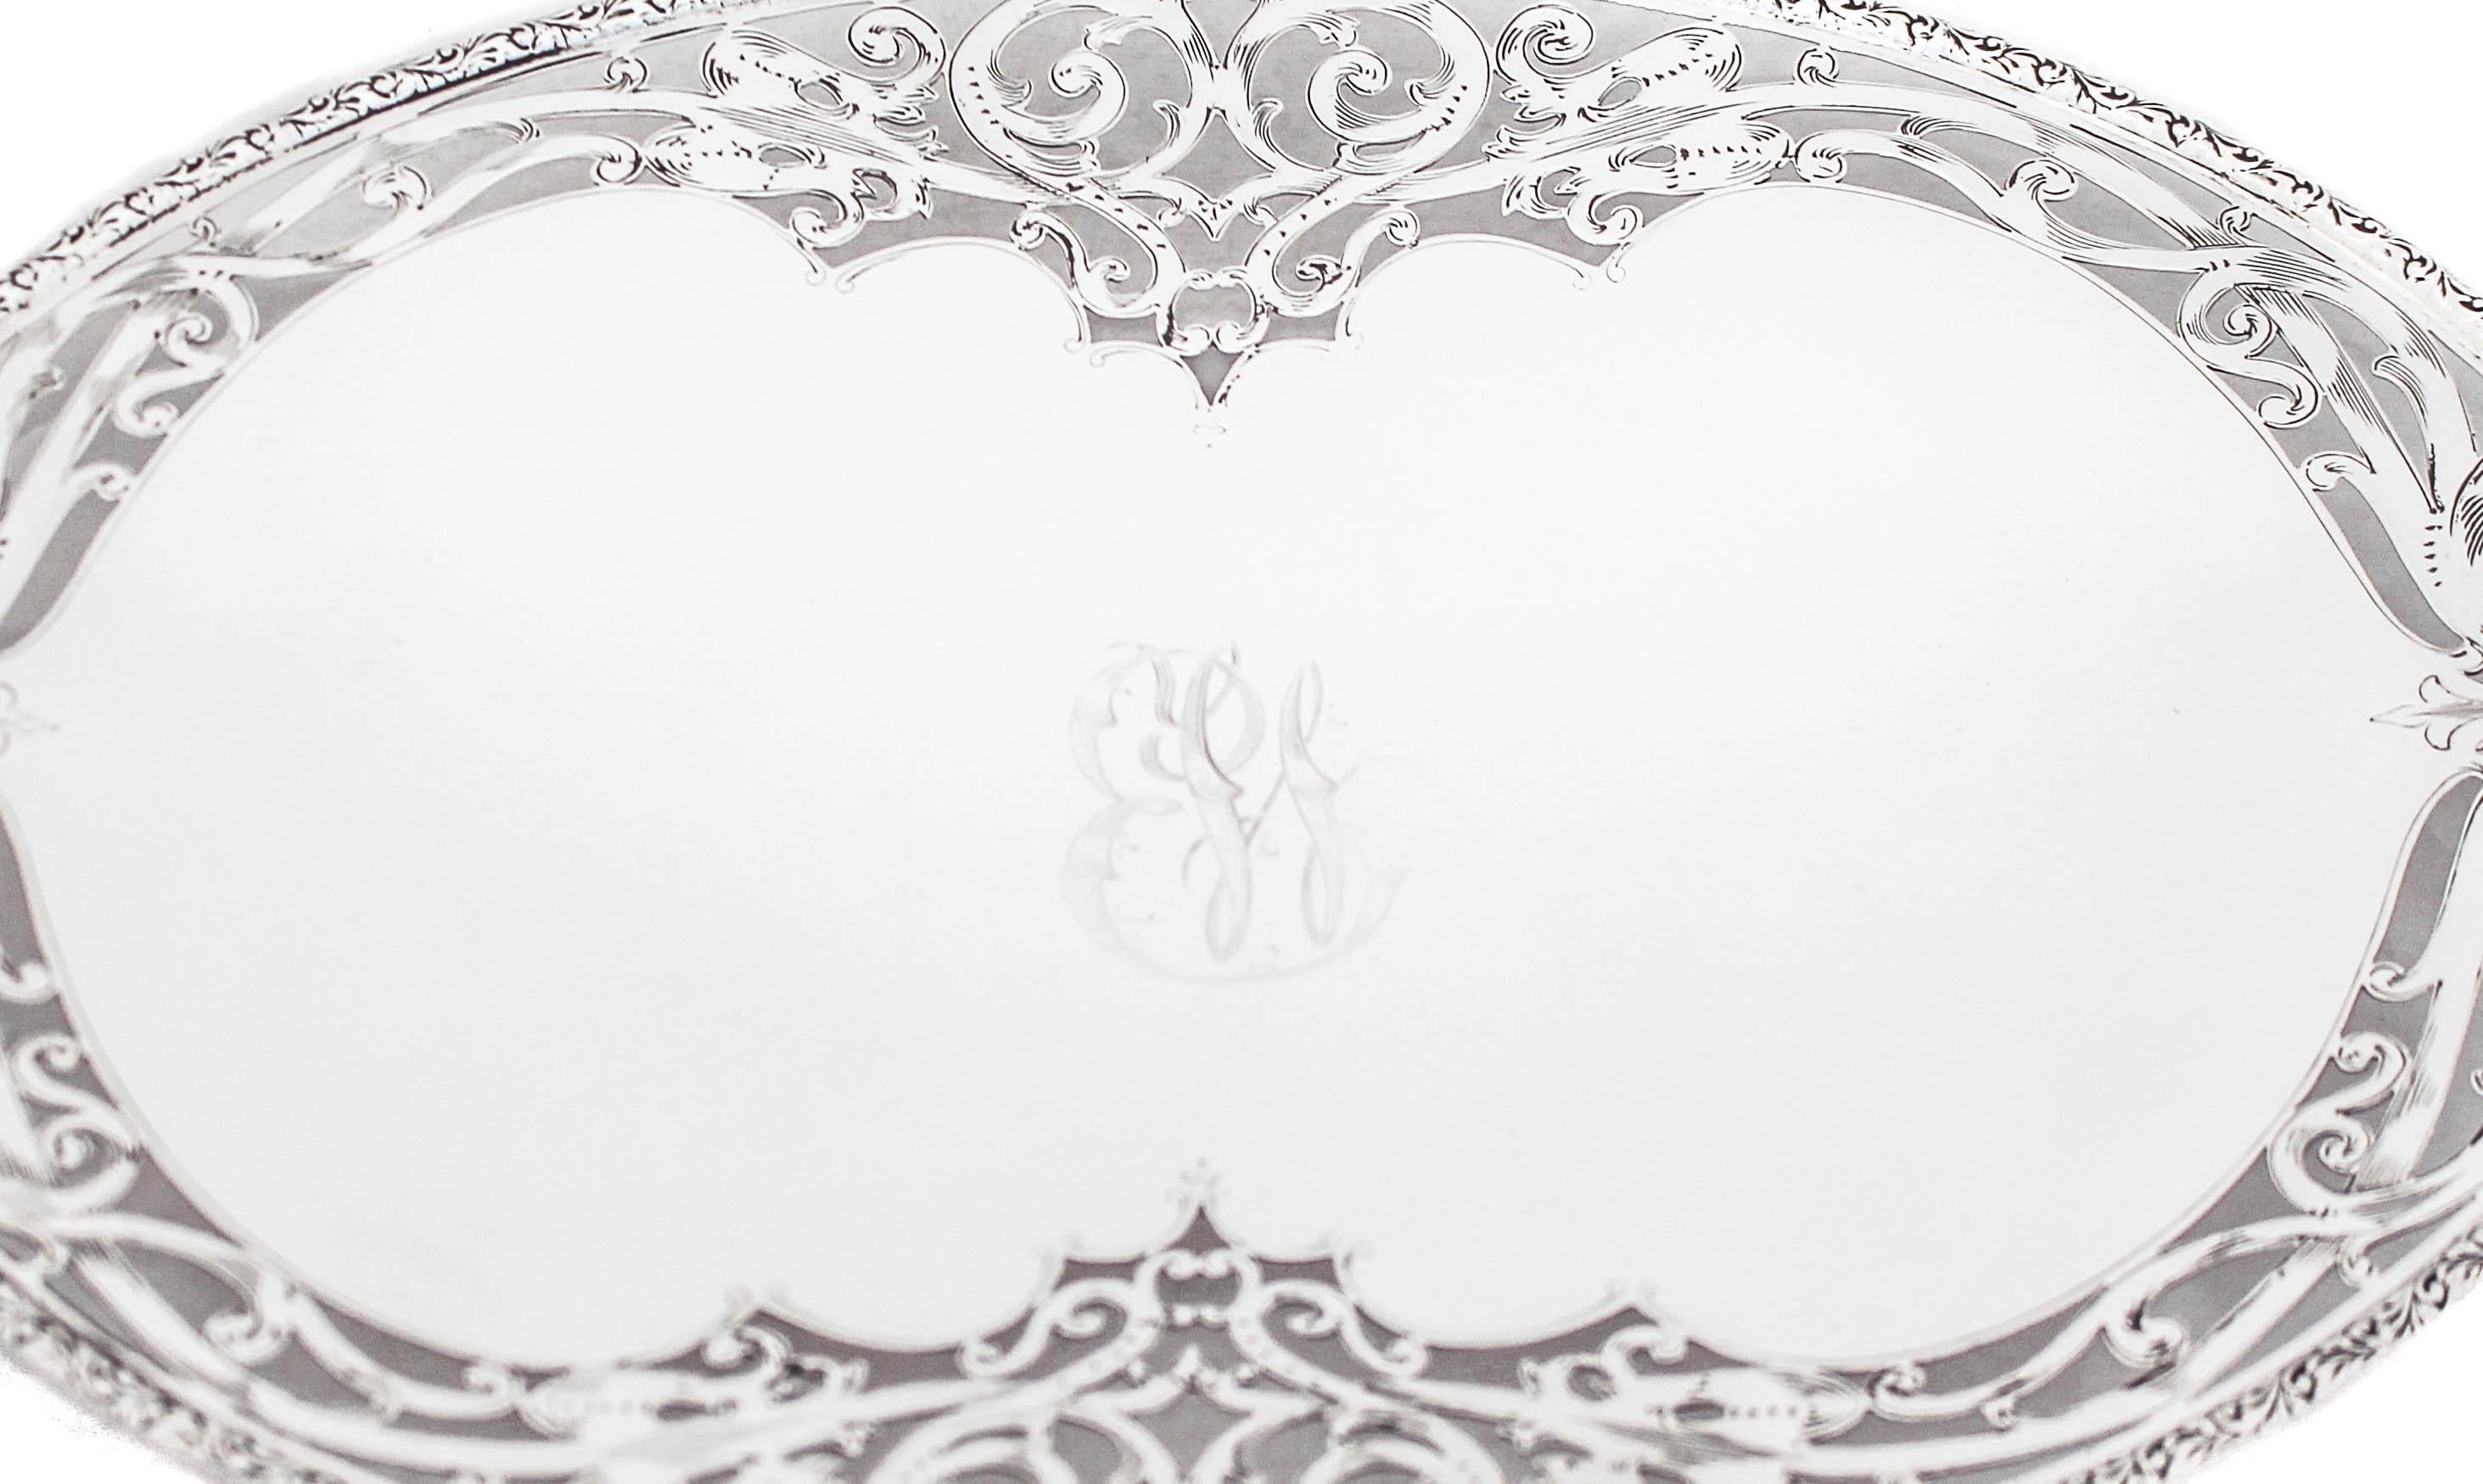 Being offered is a beautiful sterling silver tray with an elegant reticulated design going around the border.  It’s an oval piece with handles on each side and stands on a pedestal.  The entire edge has an Art Nouveau cutout pattern that compliments